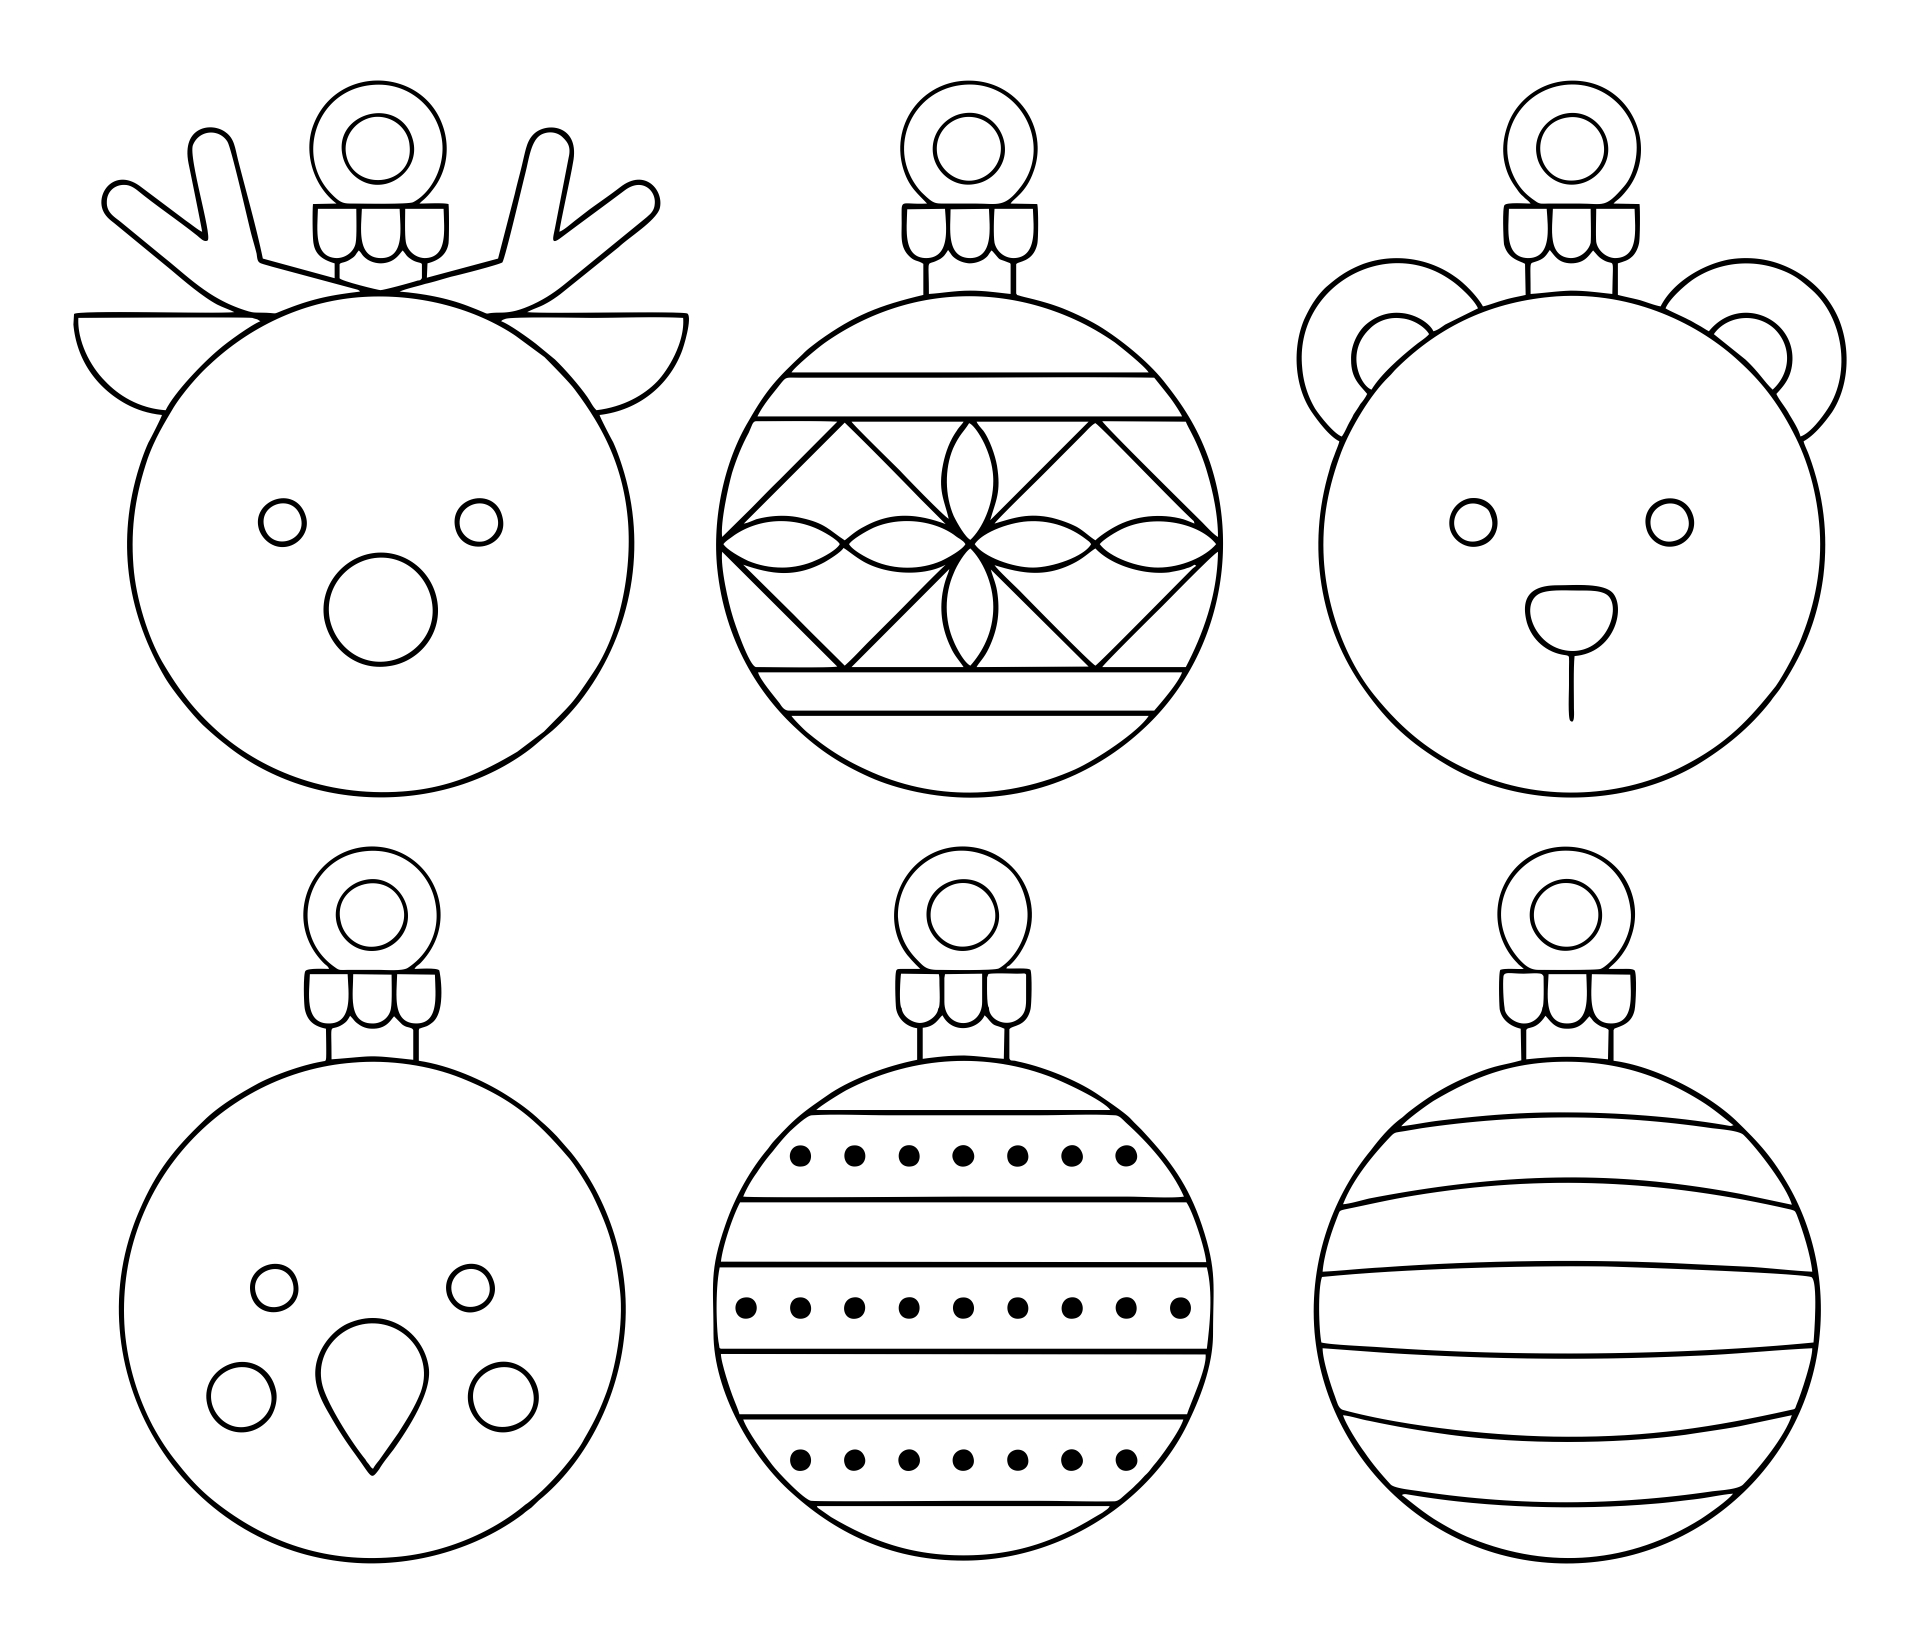 6 Best Images of Free Printable Christmas Ornament Templates